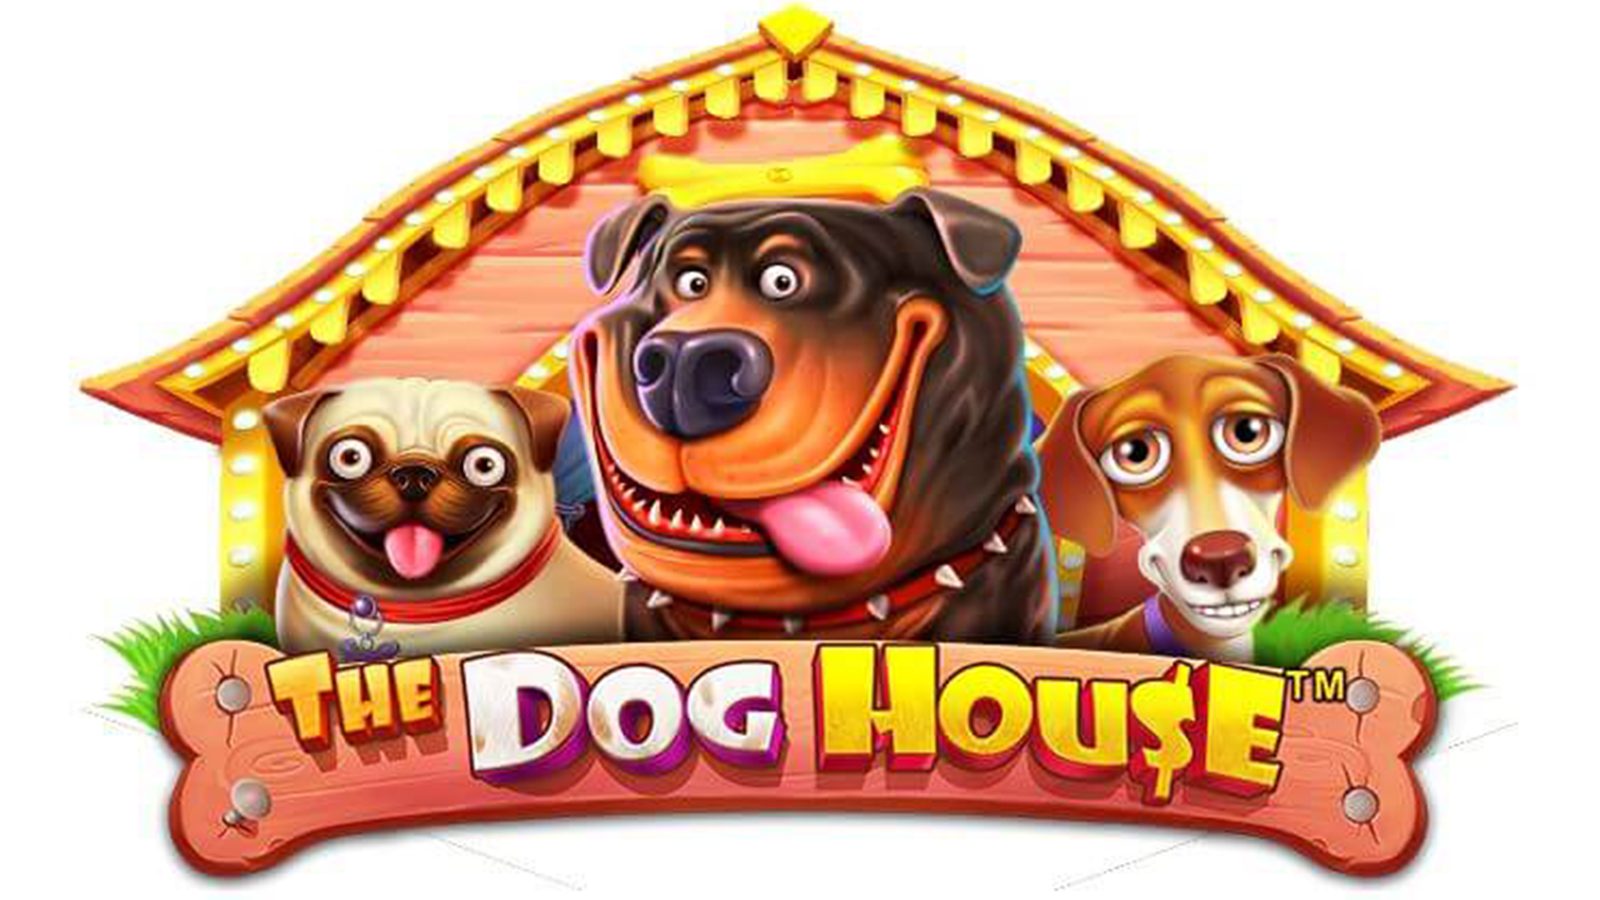 Pragmatic Play - The Dog House Slot Review